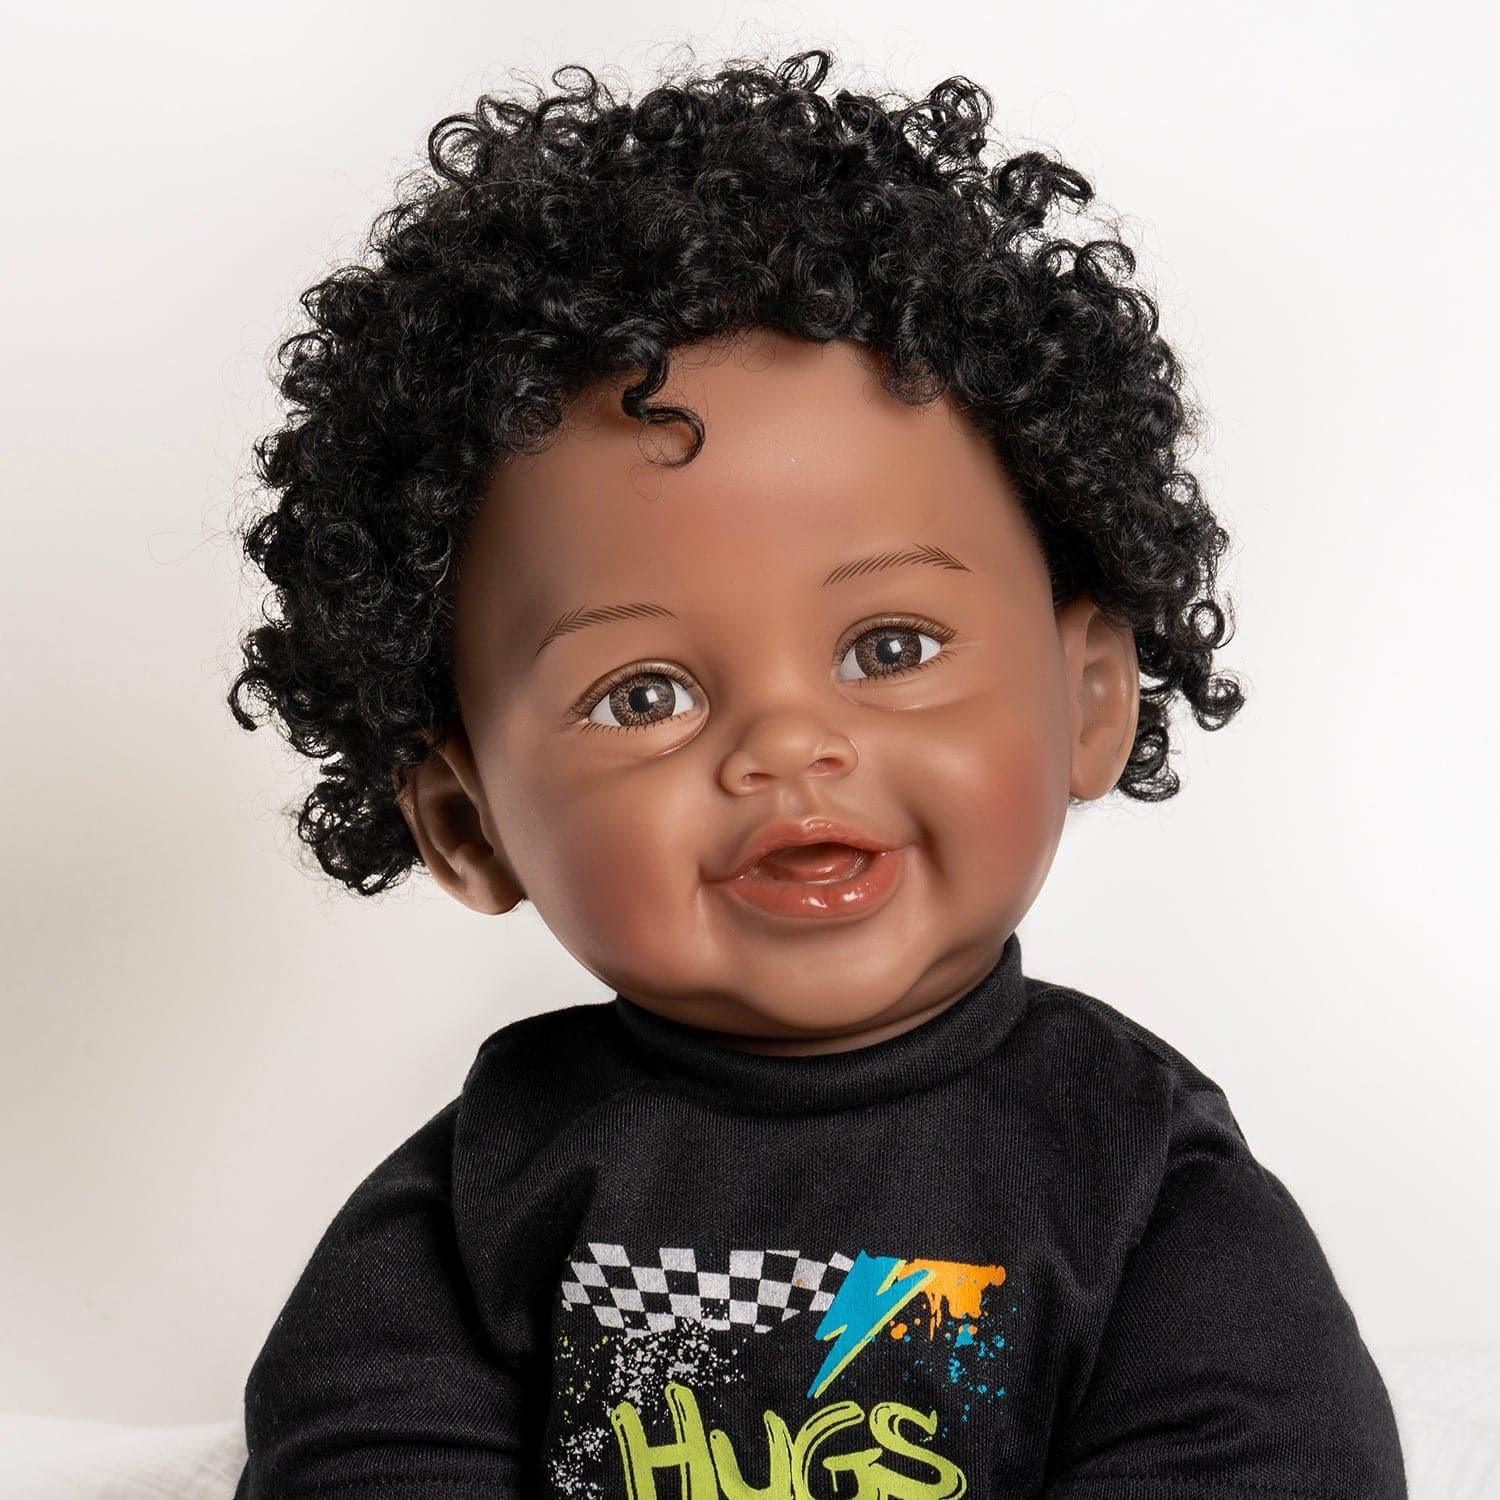 Paradise Galleries African Black Baby Doll - OH BABY! - 22 inches